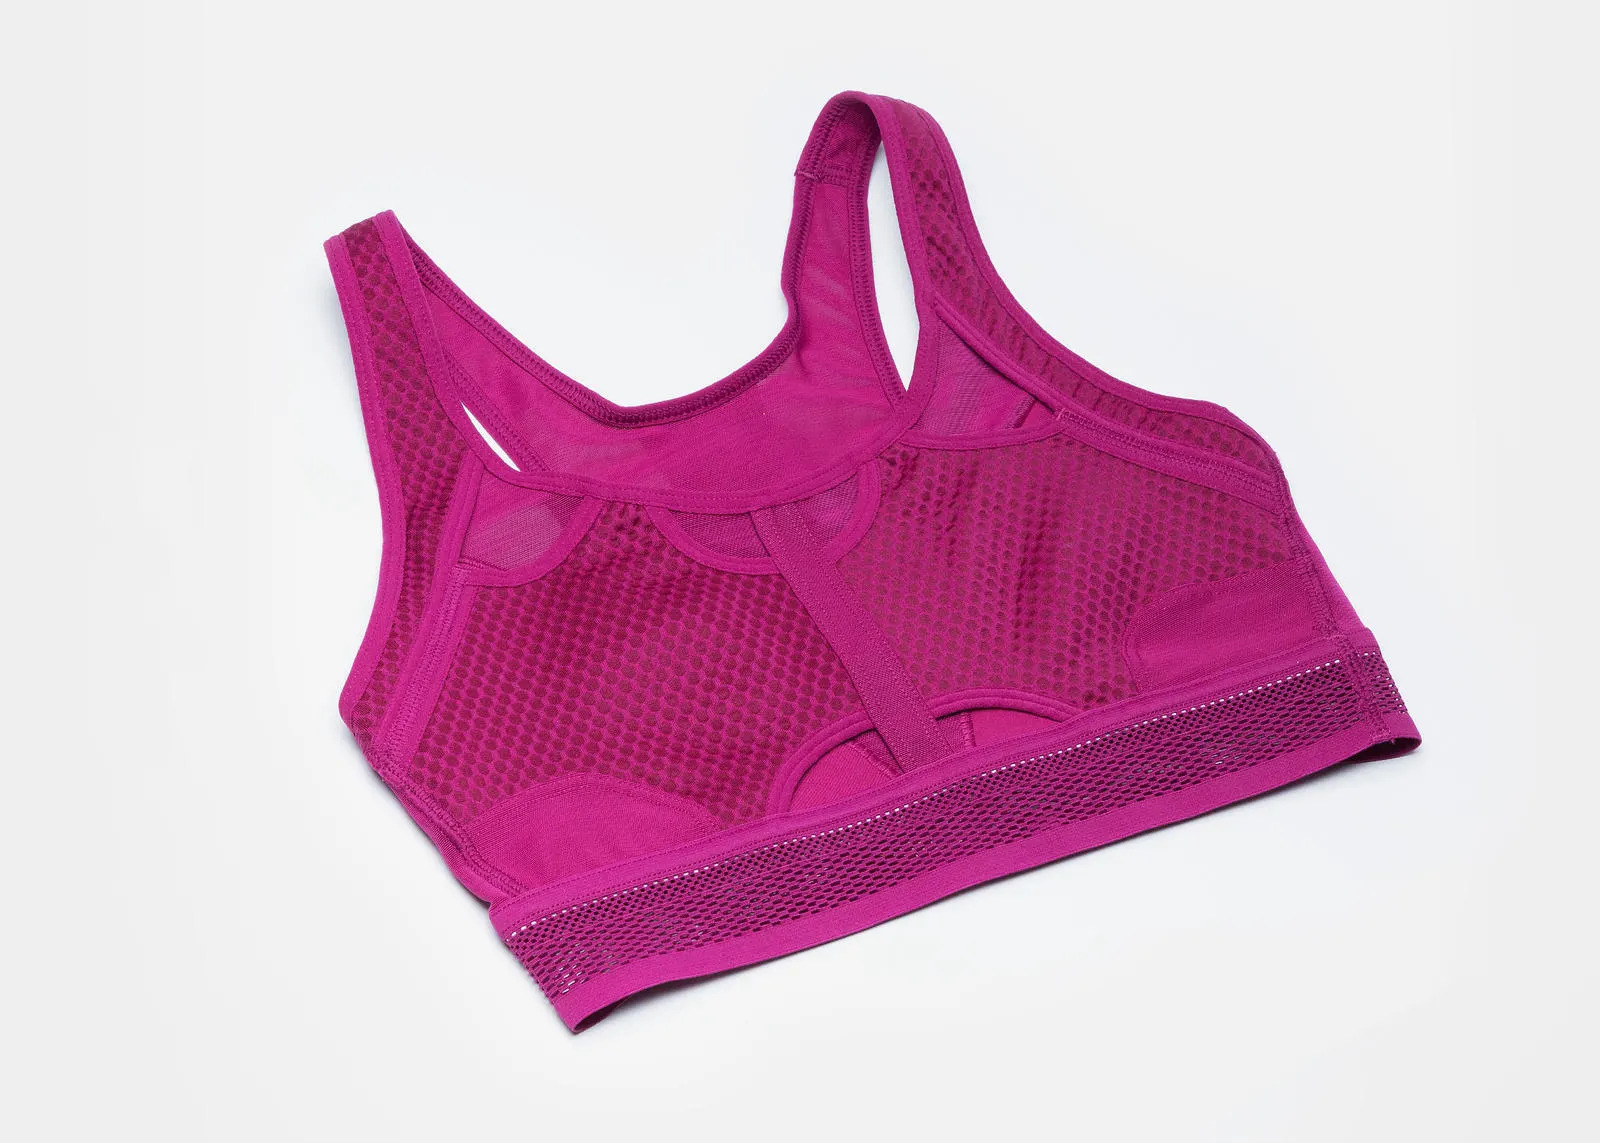 How To Wash Padded Sports Bra